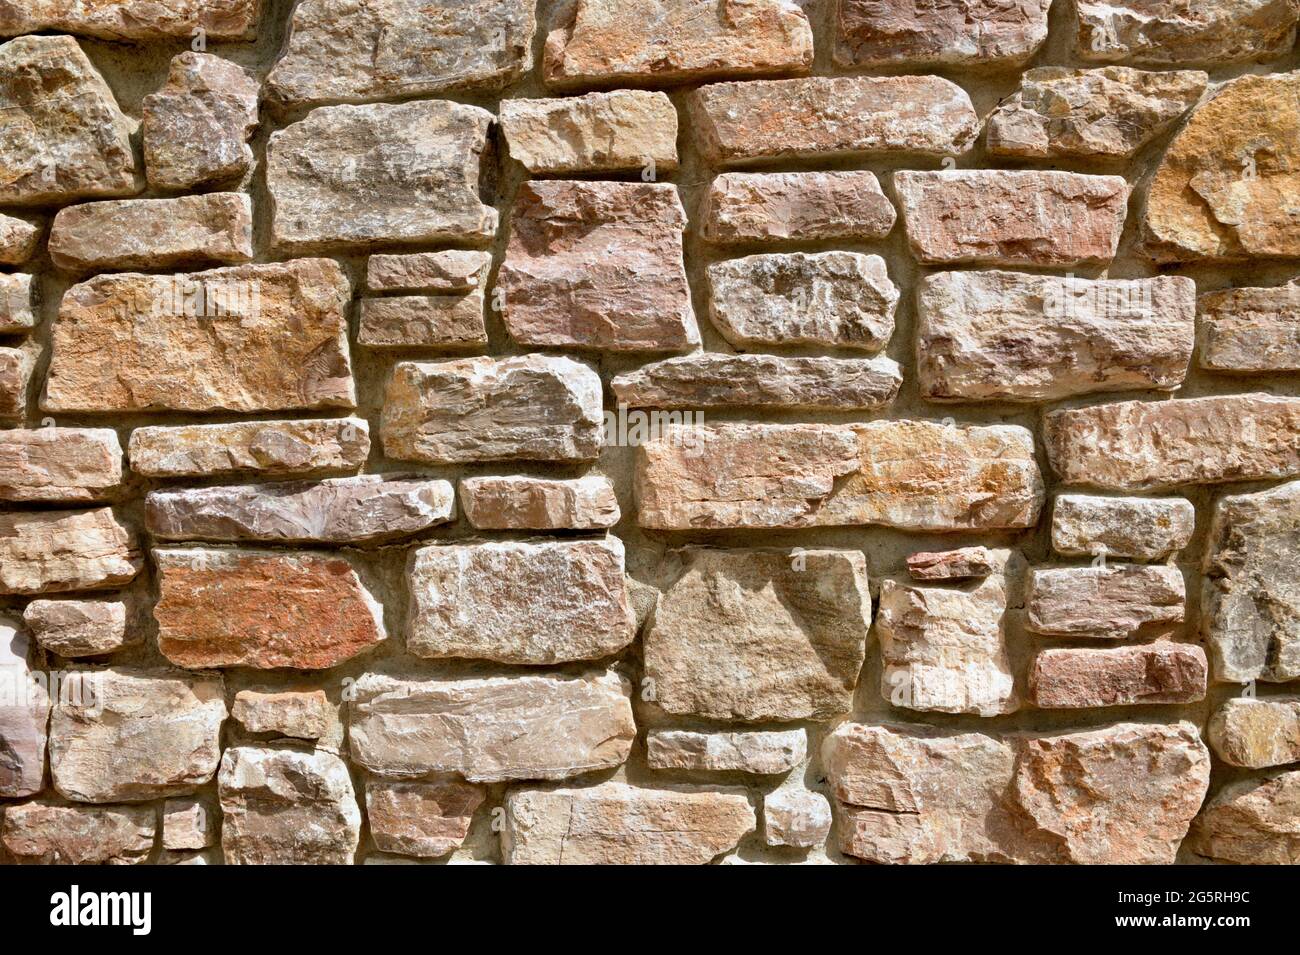 Multi-colored, Abstract Granite and Shale Stacked, Retaining Rock Walls Stock Photo